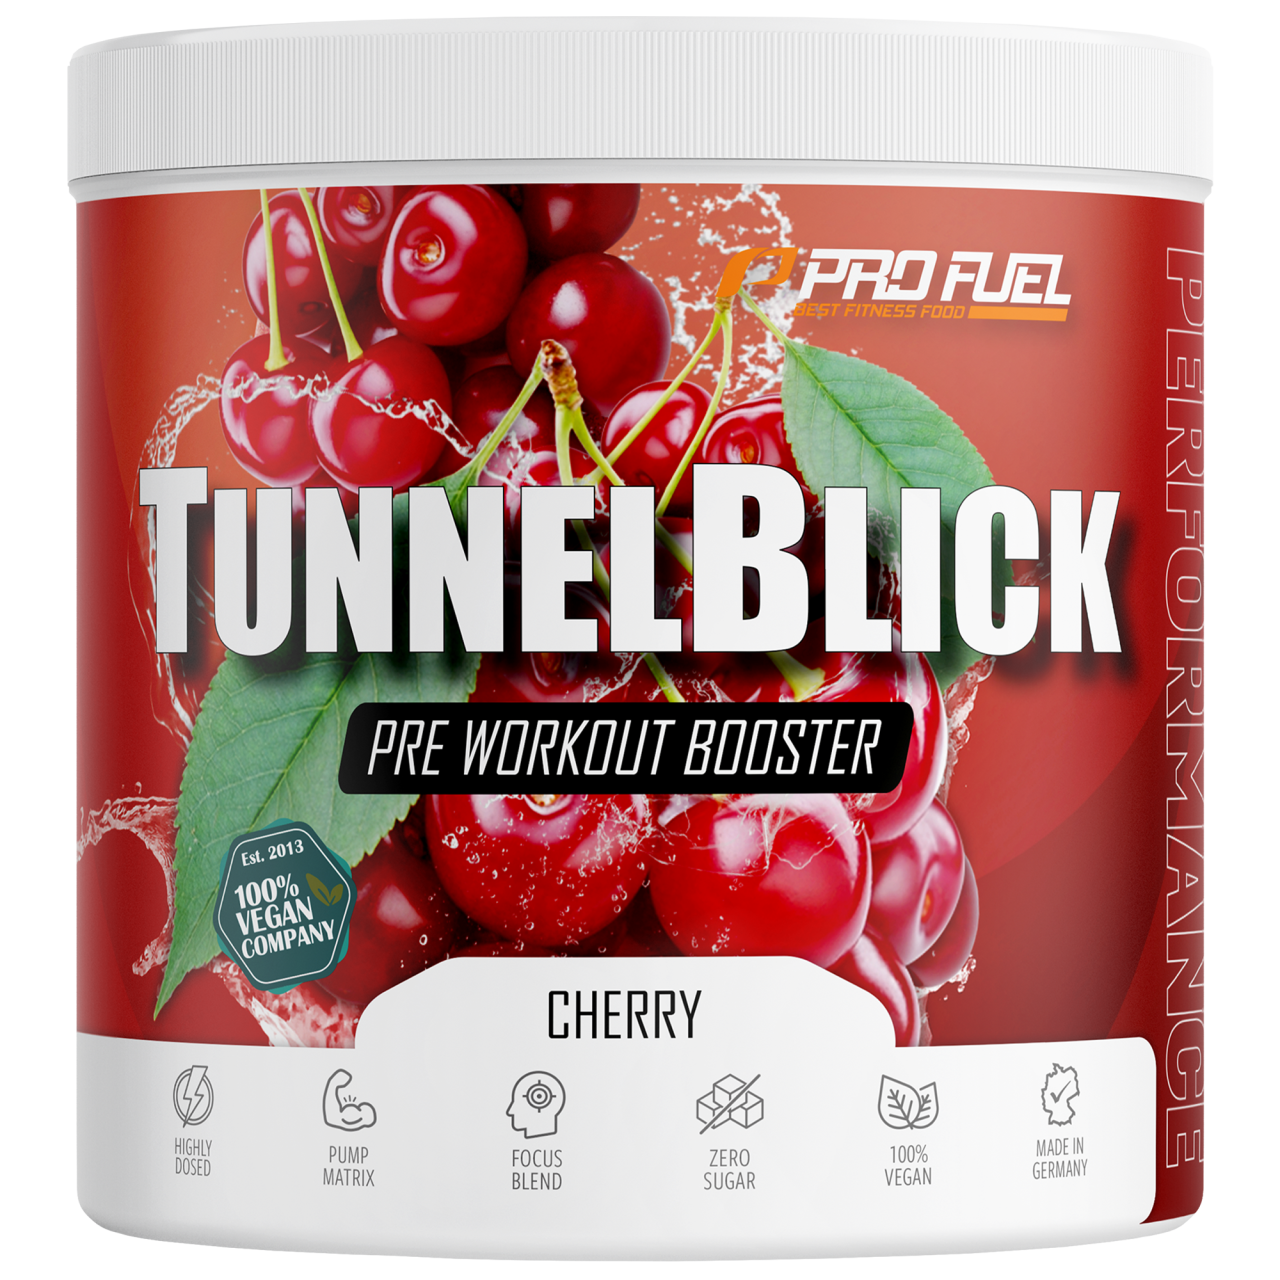 PROFUEL Tunnelblick - 360g - Pre-Workout Booster